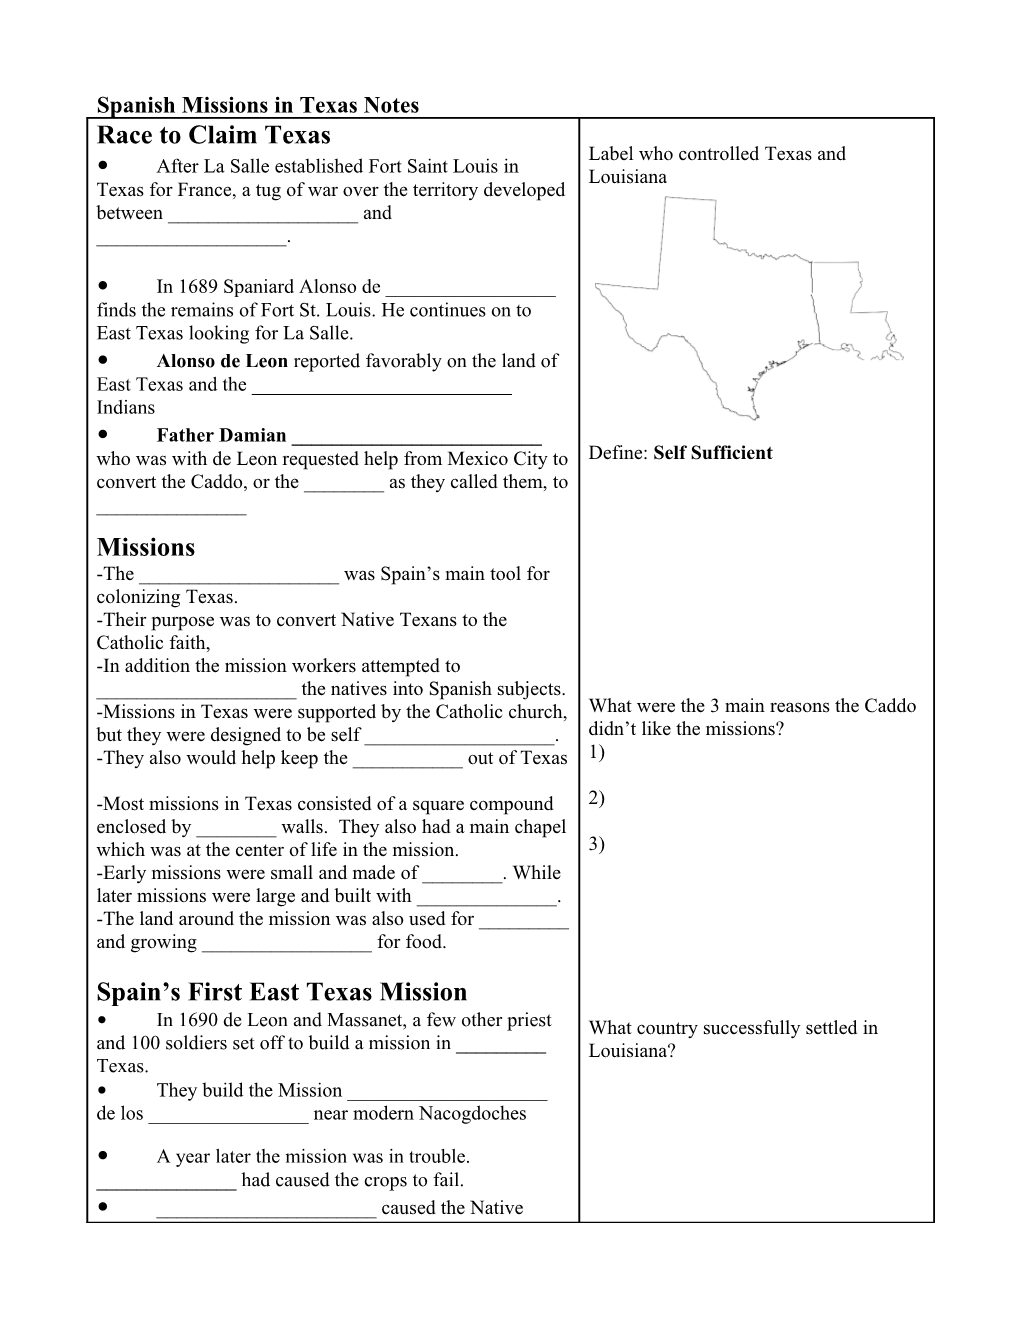 Spanish Missions in Texas Notes